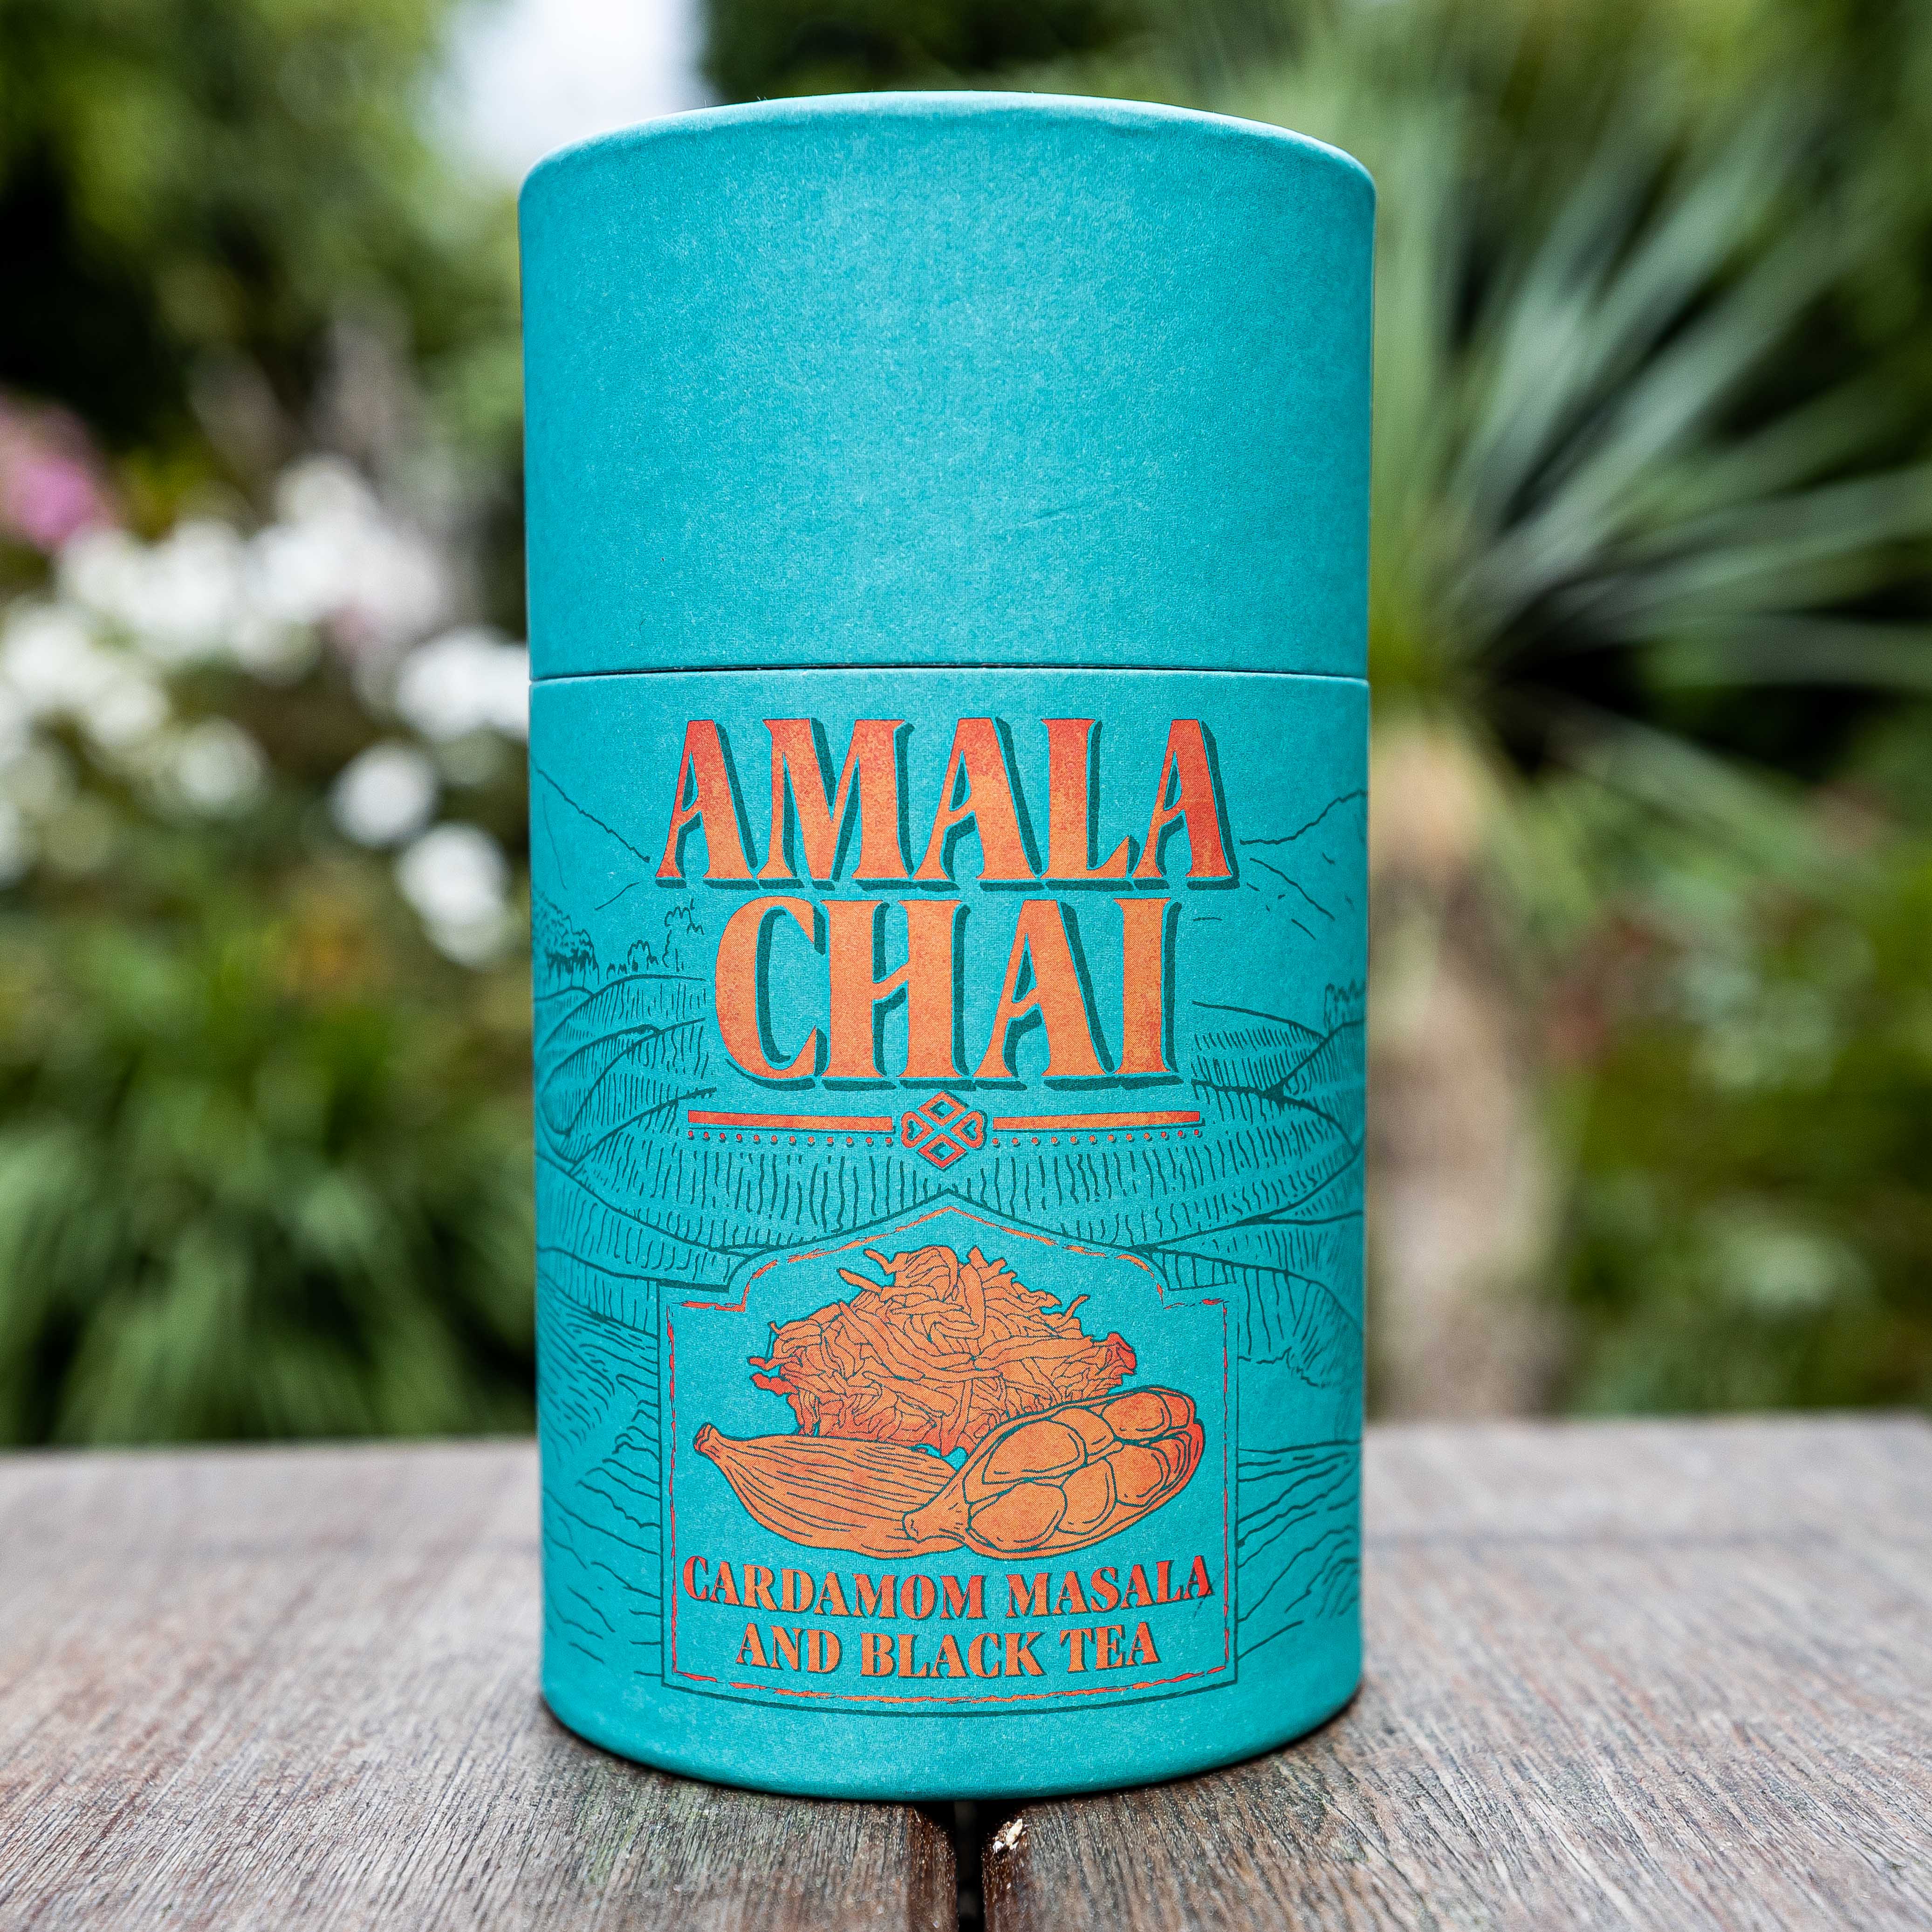 What Do Amala Chai And Polyphenols Have In Common?